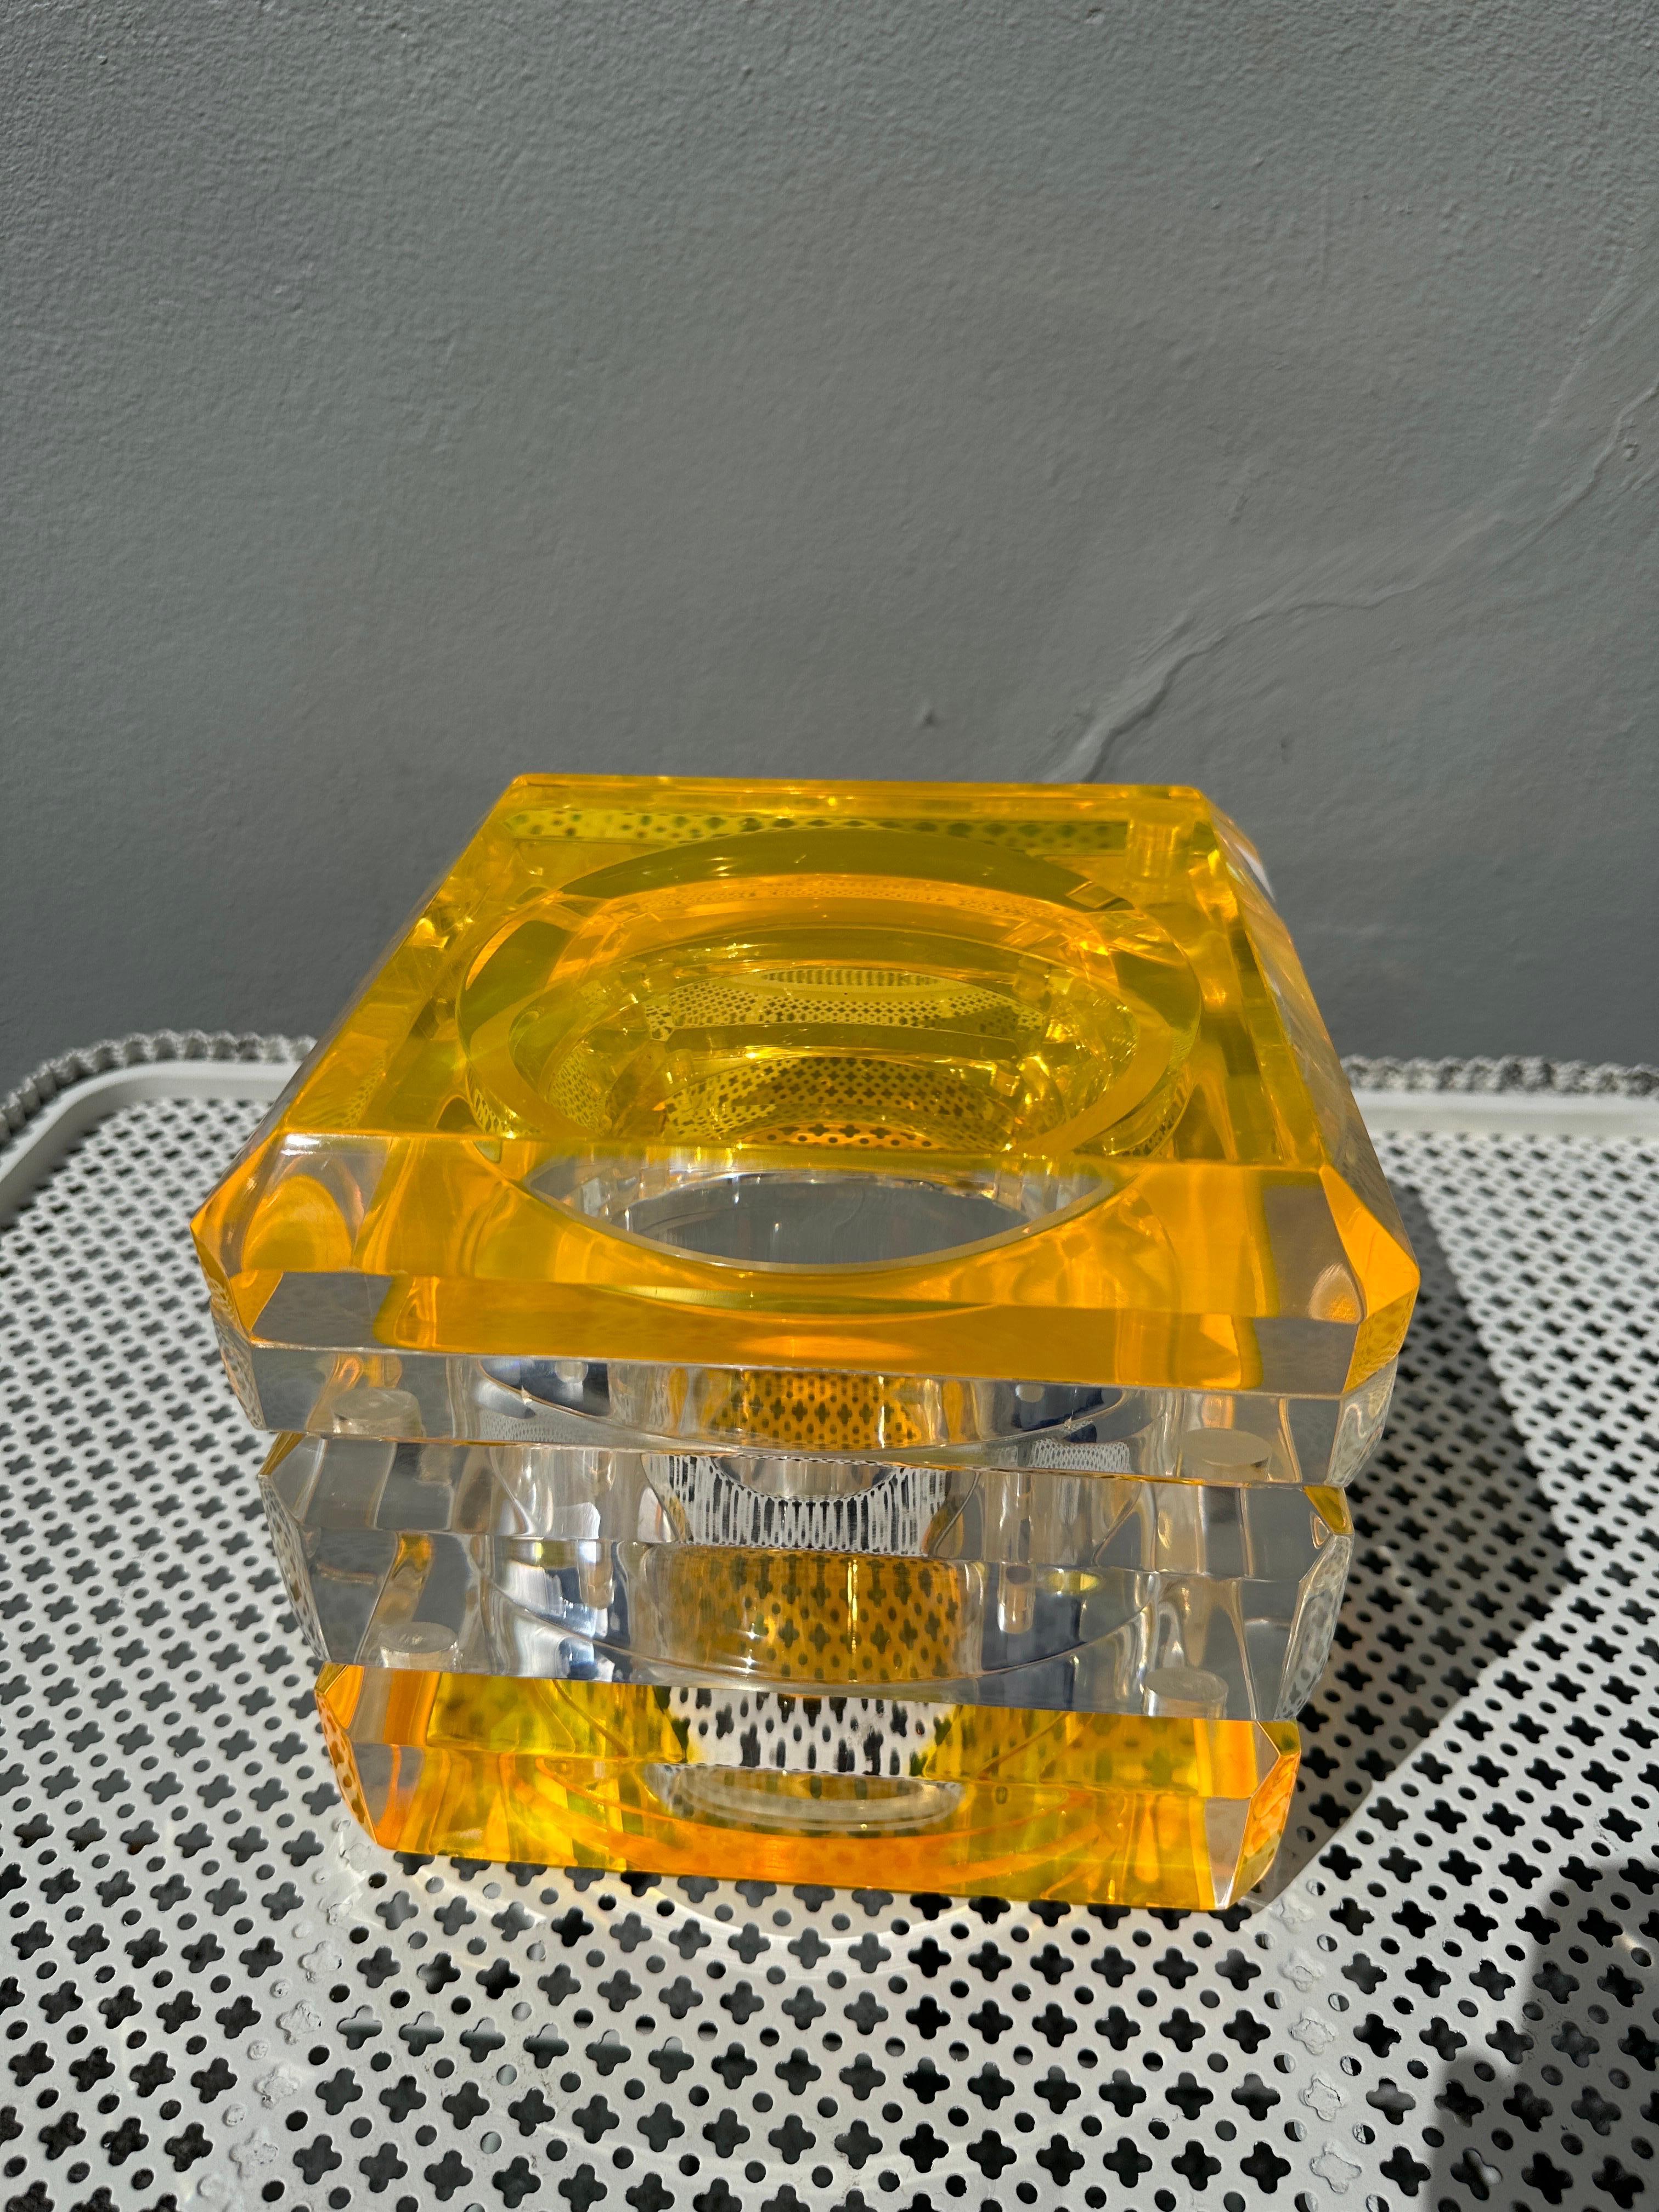 This wonderful vintage faceted acrylic box with swivel top by Alessandro Albrizzi is a perfect decorative bowl or candy dish!